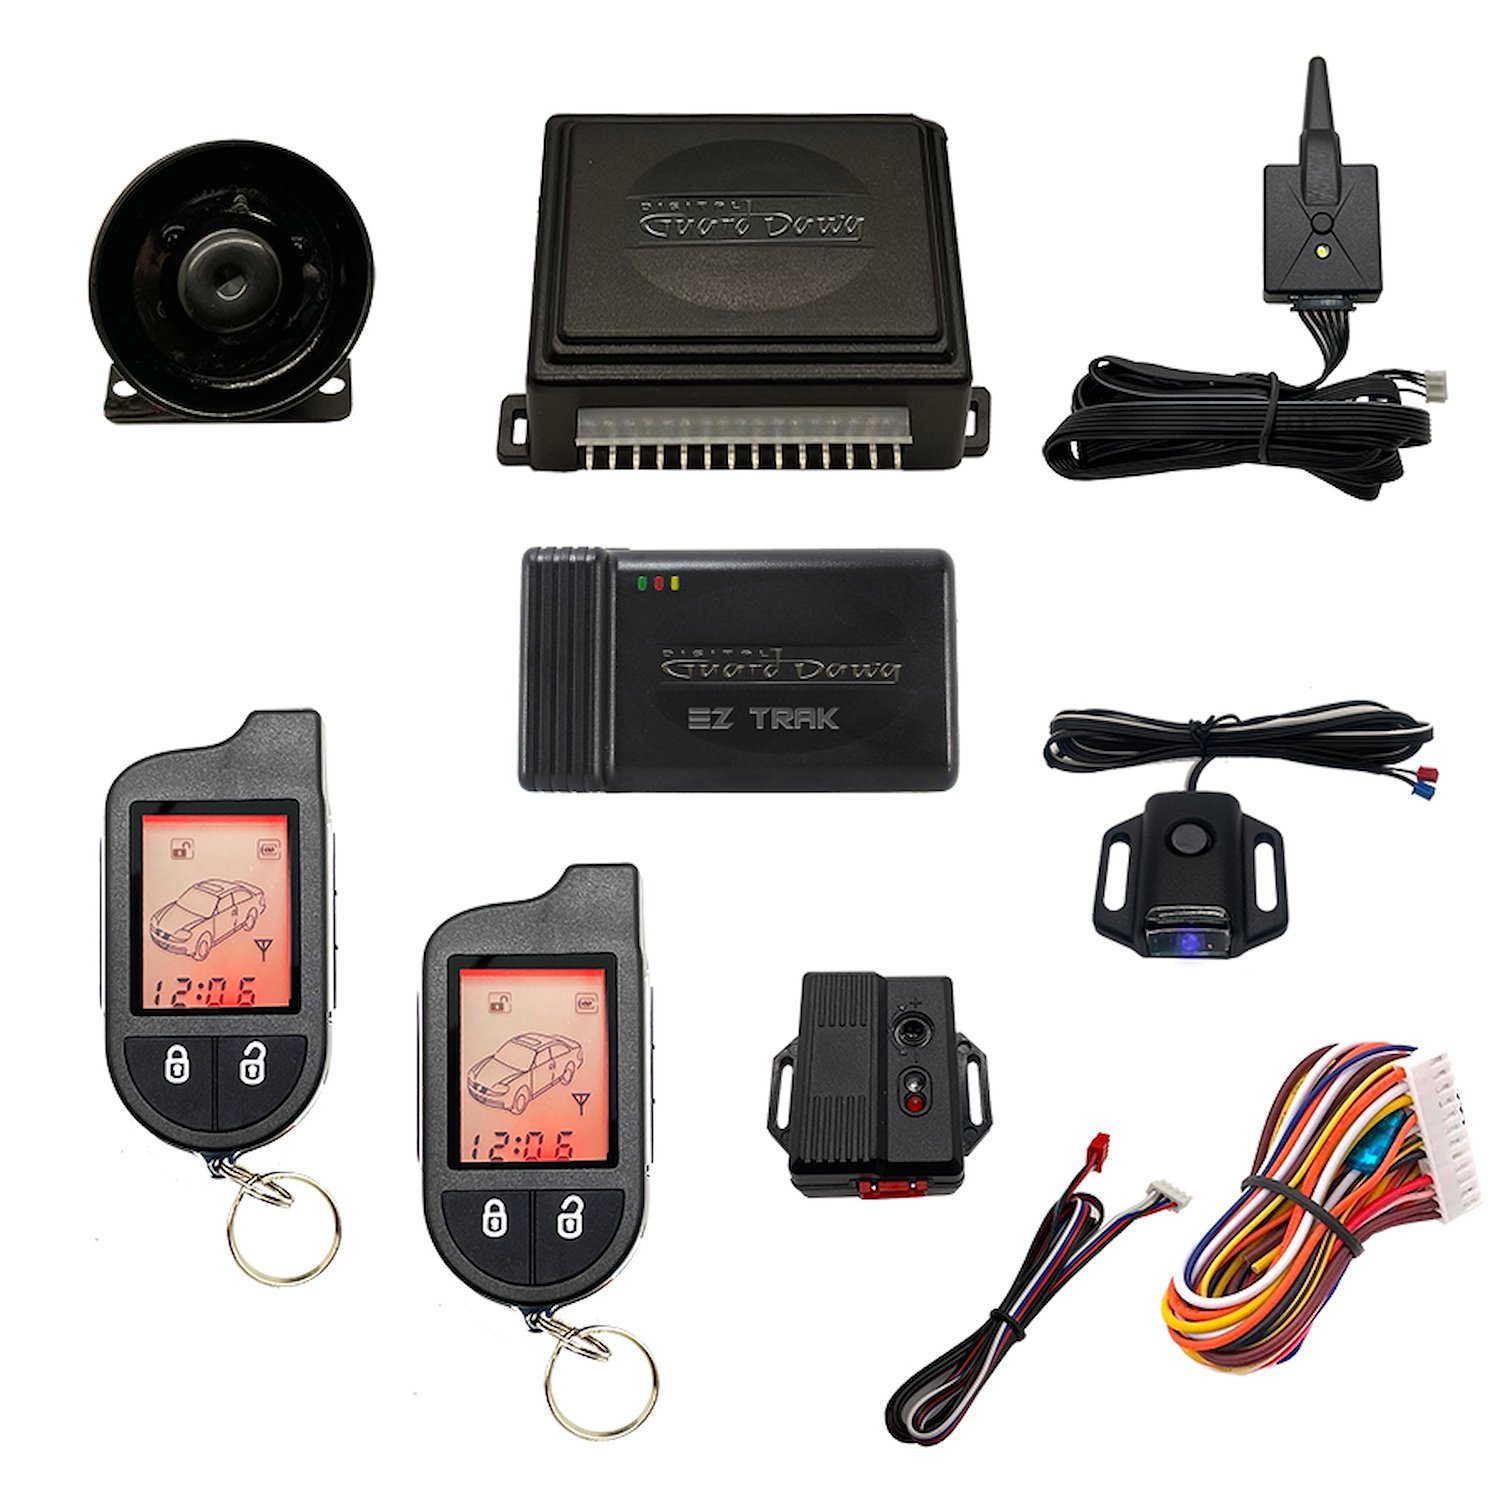 DGD-KY-ALM-2-EZ Keyless Entry and Alarm System, 2-Way, w/ Smart Phone EZ-Tracking